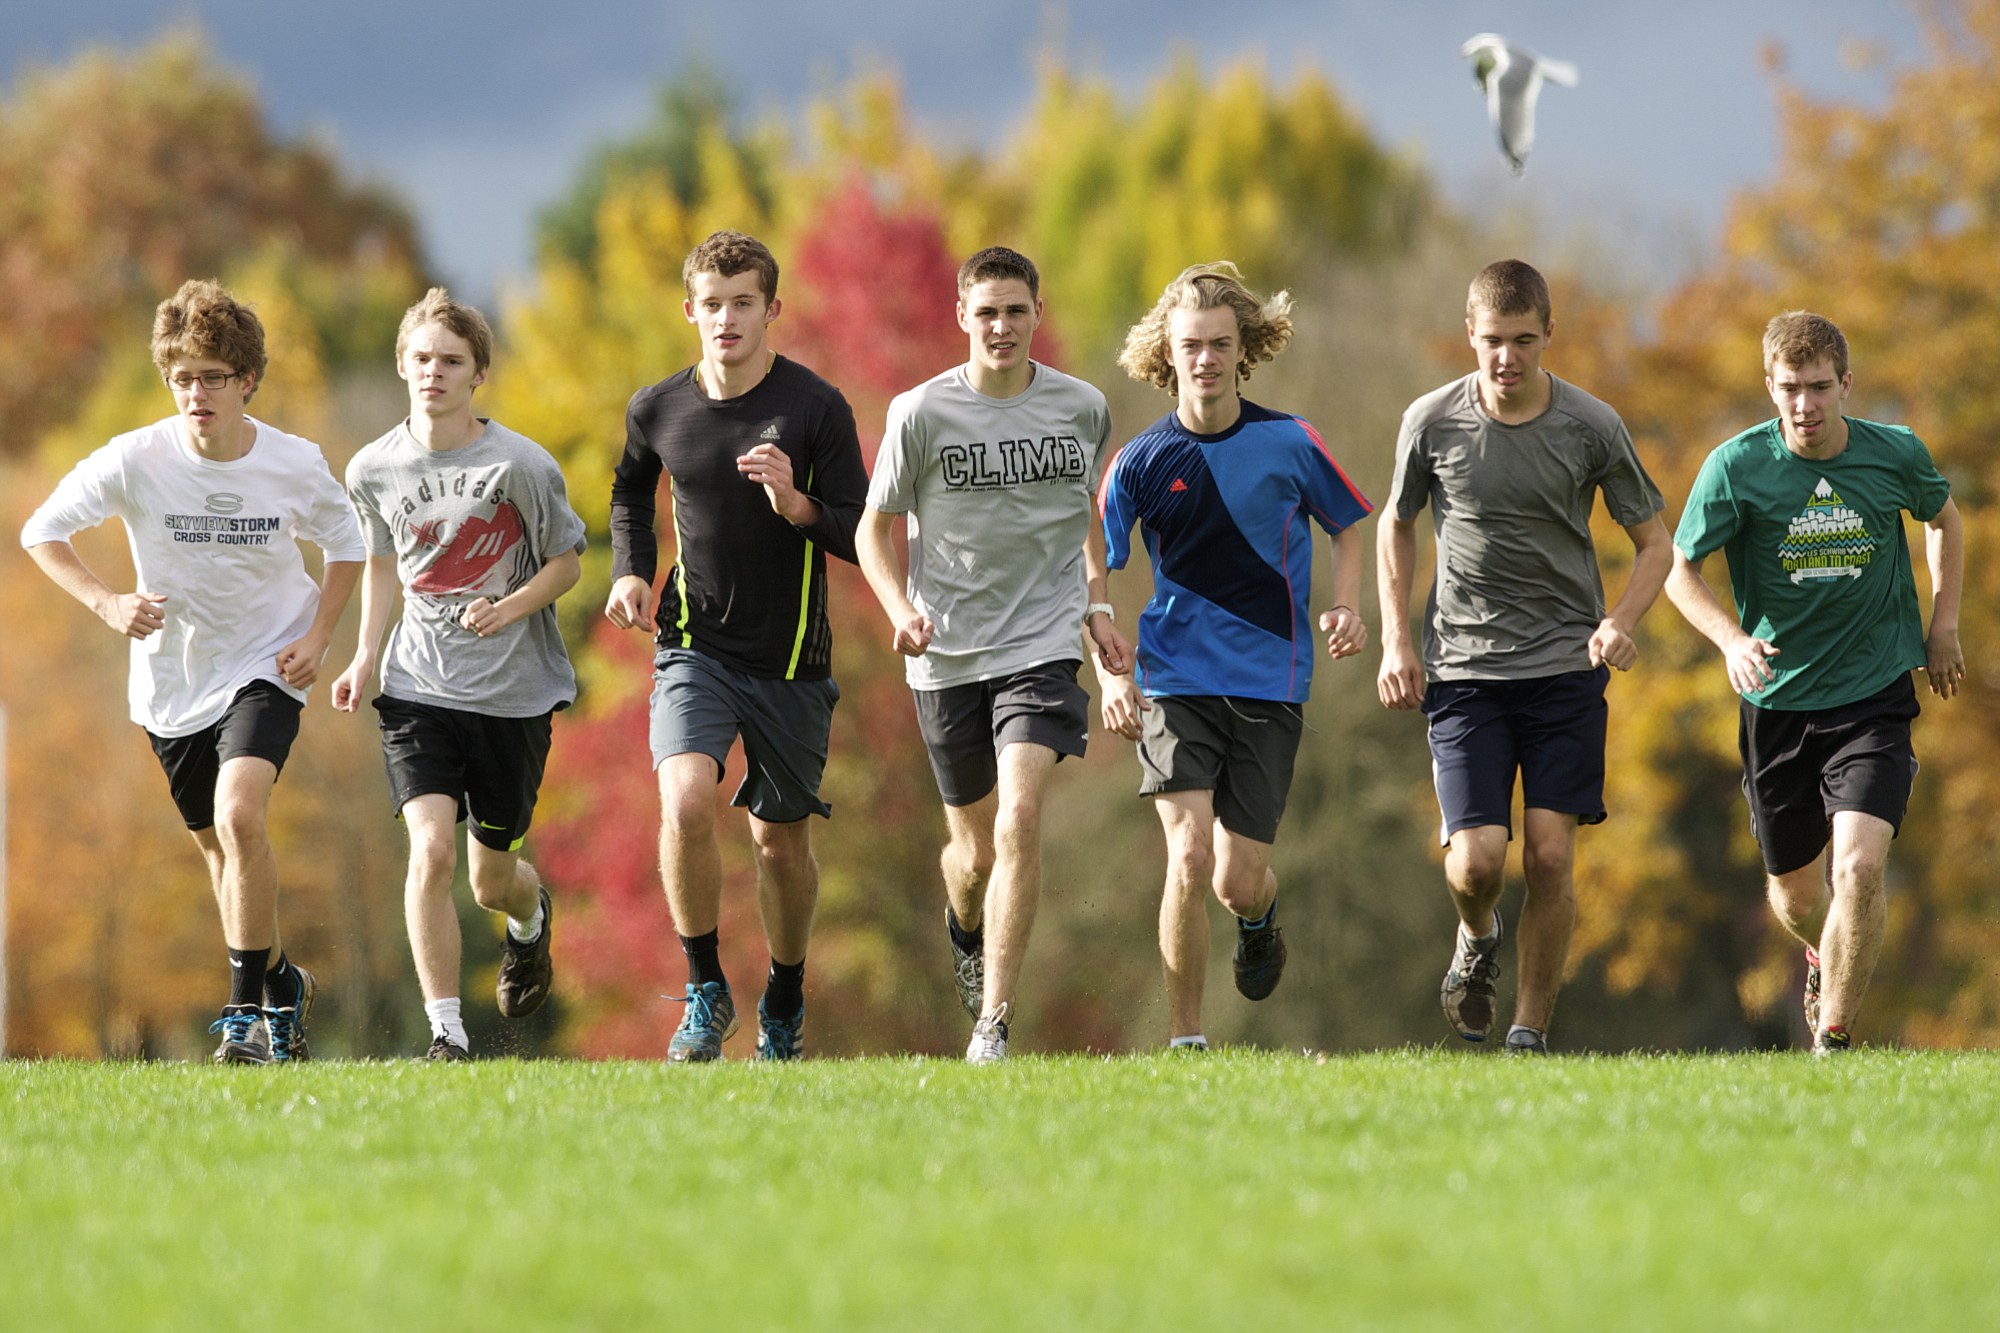 The Skyview boys cross country team has its sights on a top-3 finish at the 4A cross country championship in Pasco on Saturday.